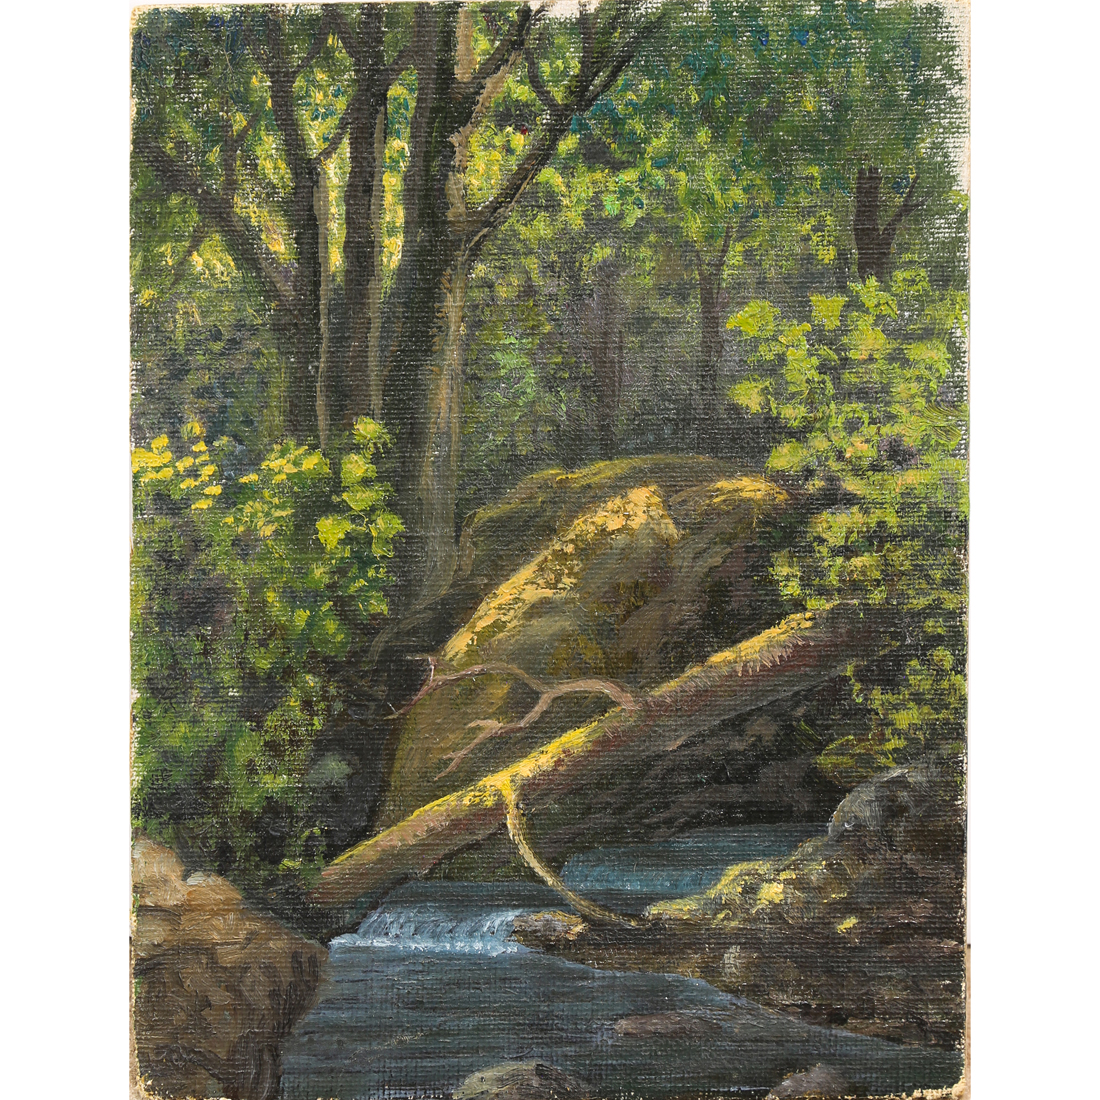 PAINTING A MOUNTAIN STREAM American 3a3b91